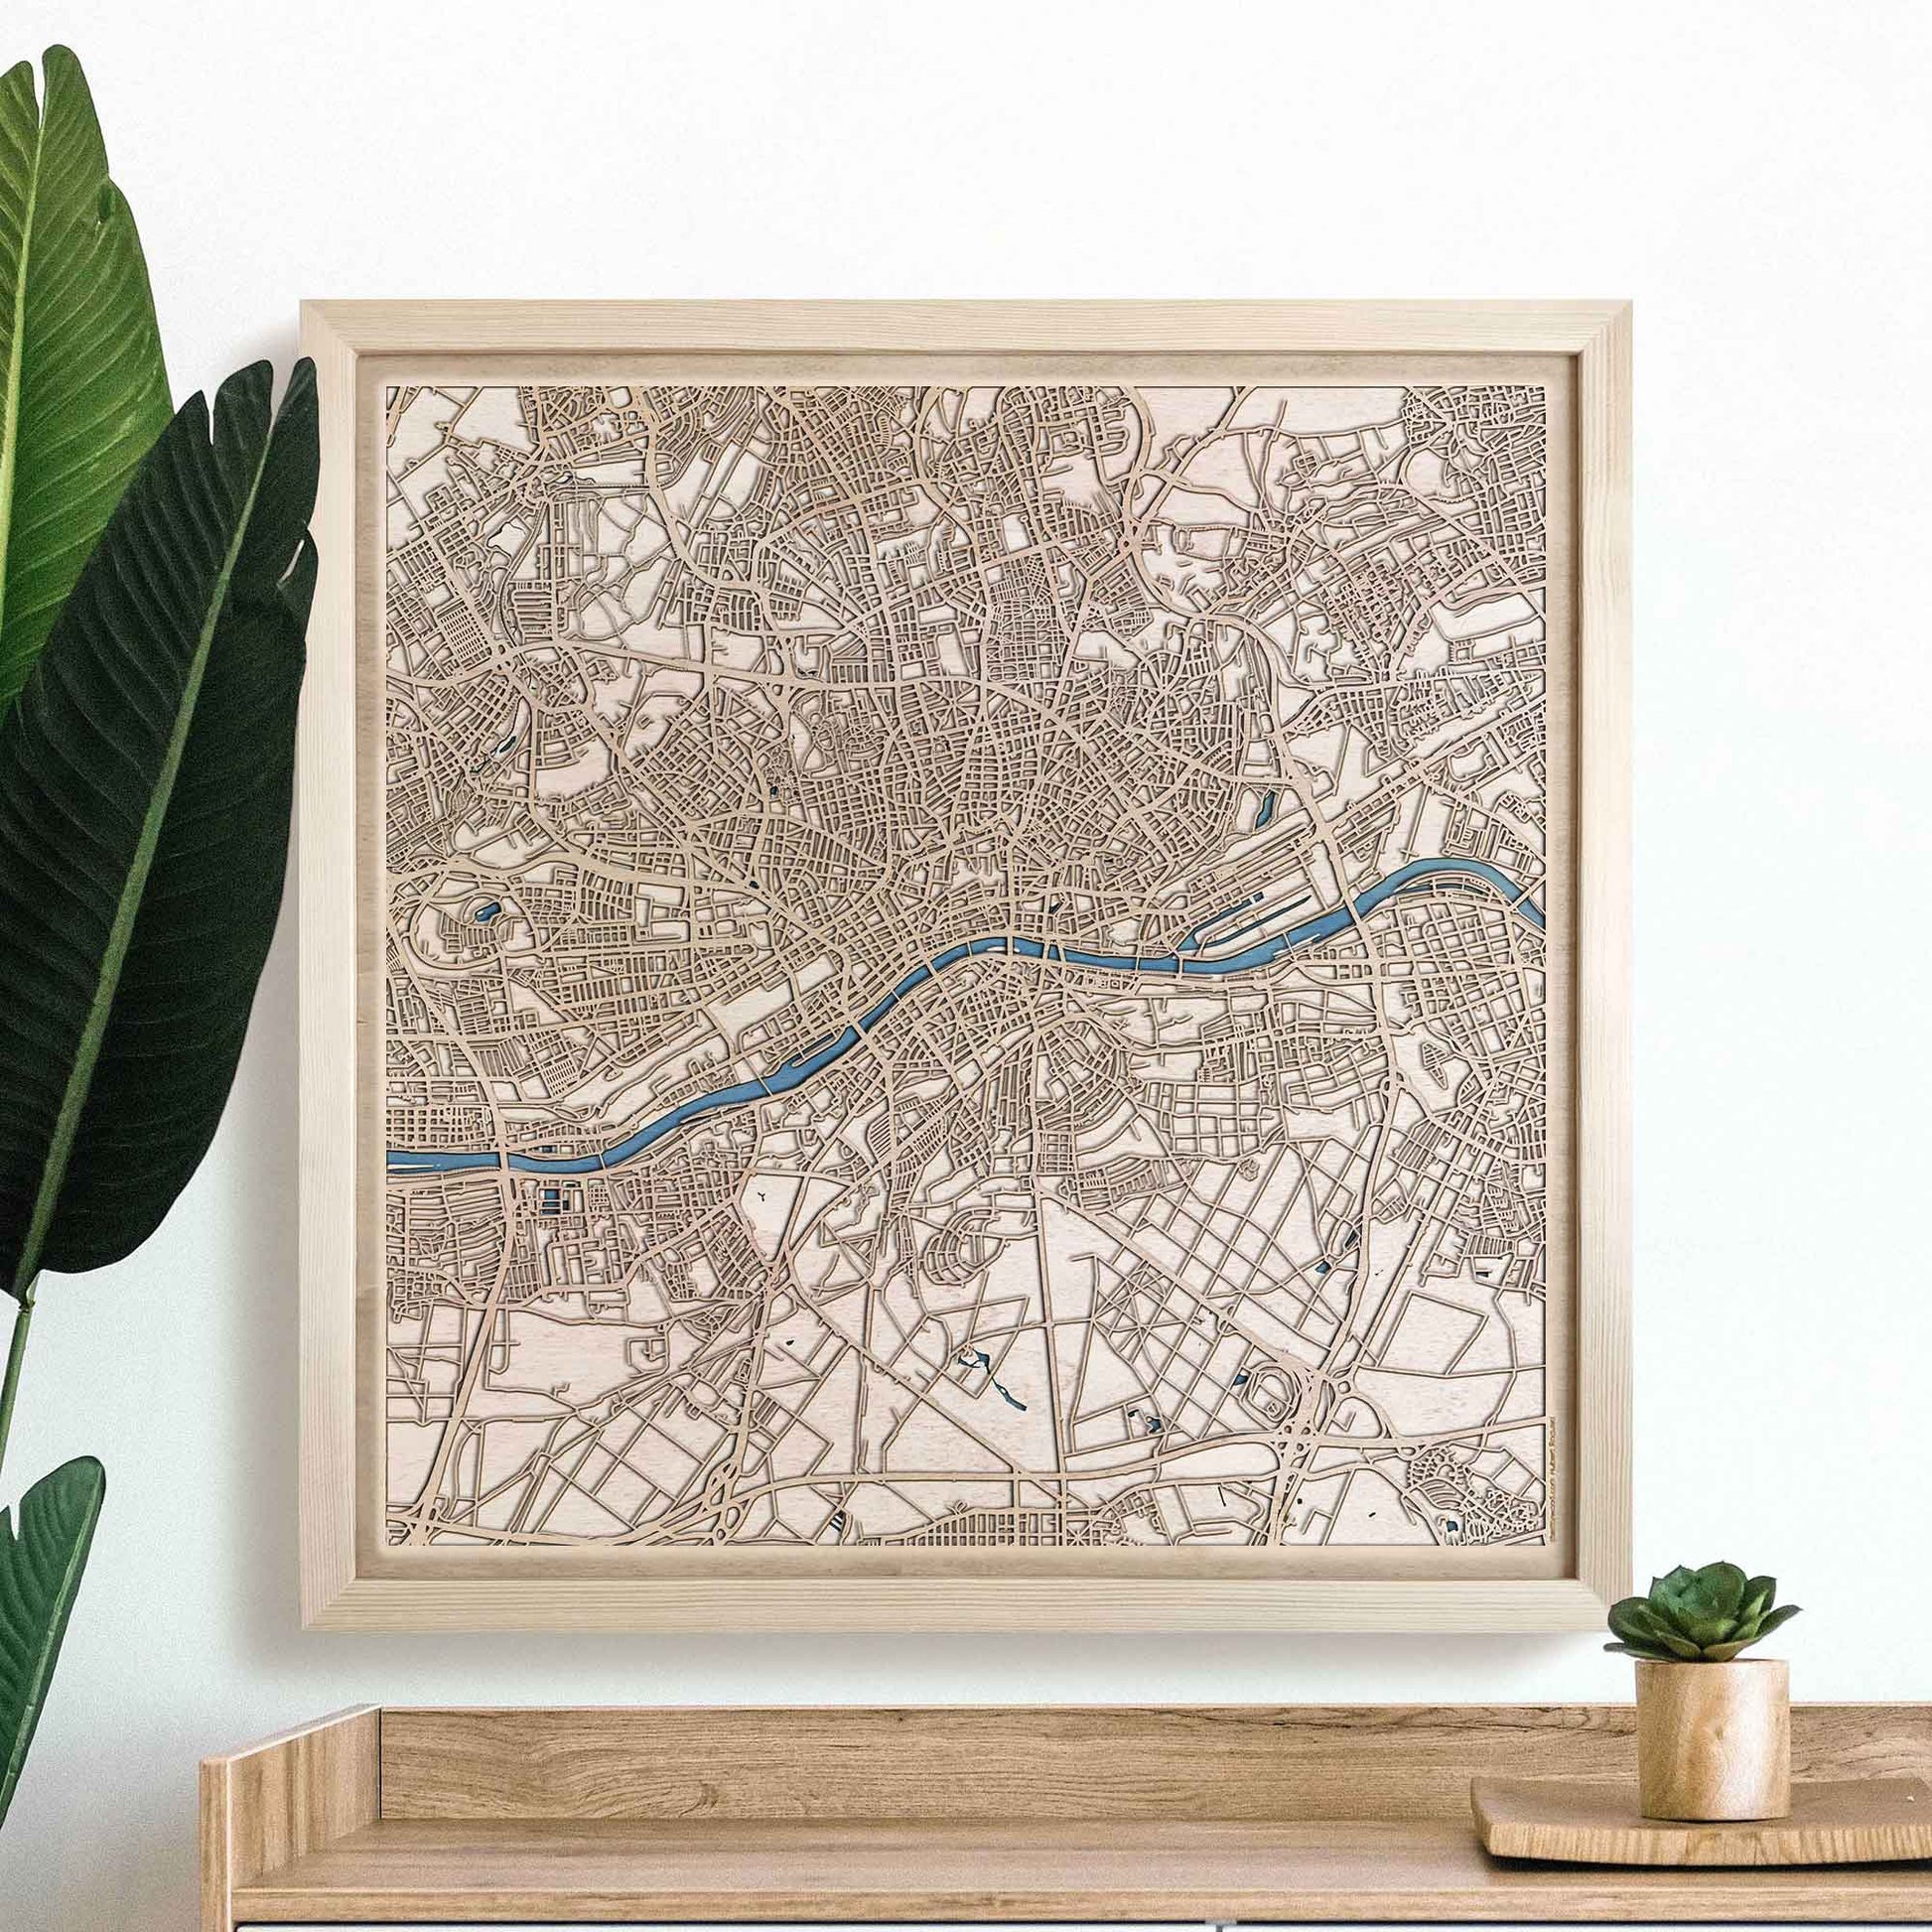 Frankfurt Wooden Map by CityWood - Custom Wood Map Art - Unique Laser Cut Engraved - Anniversary Gift